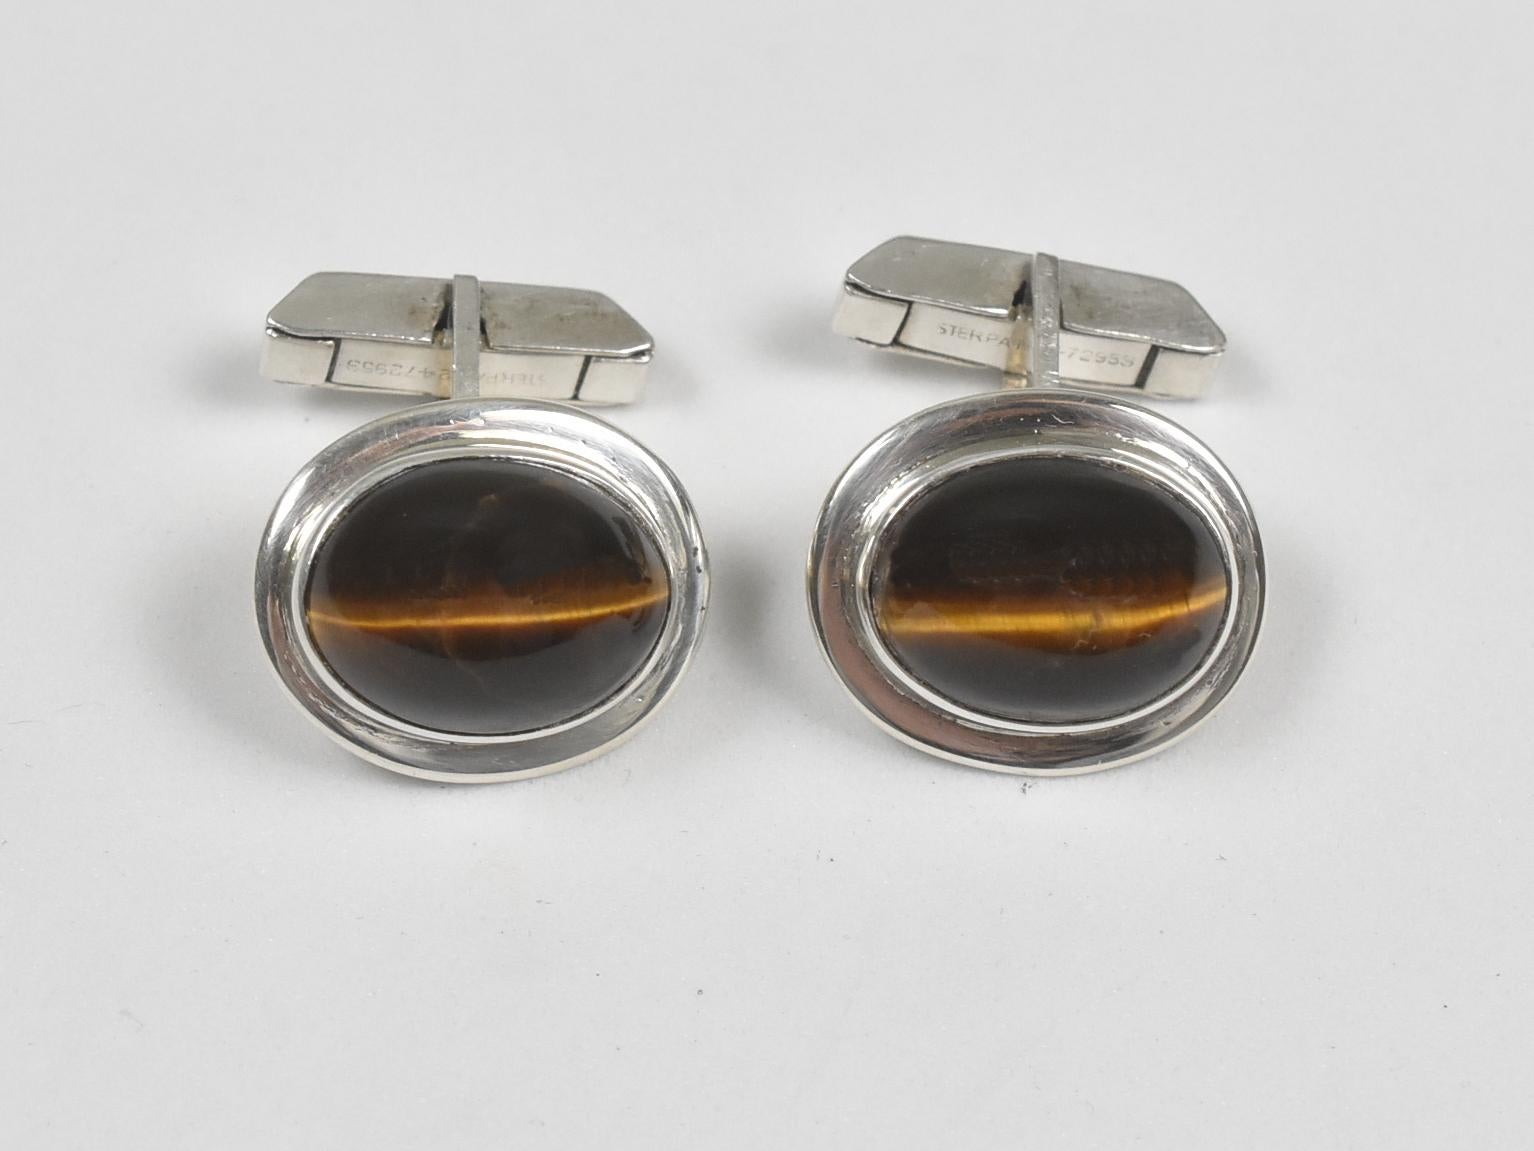 Oval tiger-eye sterling silver cabochon cuff links. Measures: 3 cm x 1.7 cm, marked sterling, stone measures: 1.6 cm x 1.1 cm, 14.8 grams total weight. Overall, in great condition.